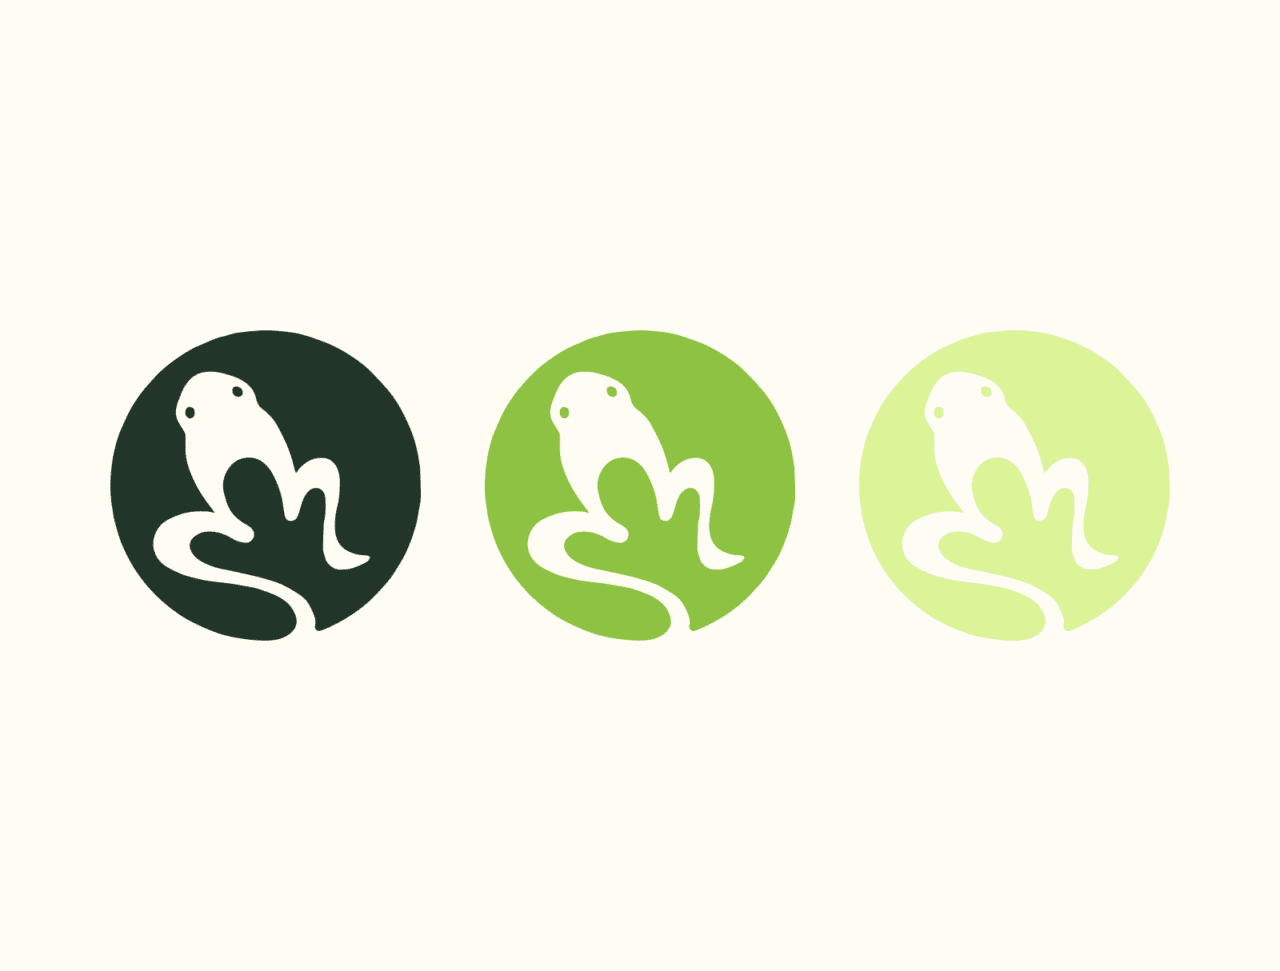 three logo icons for Amphibian Stage, a stylised illustration of a frog within a circle, in three shades of green